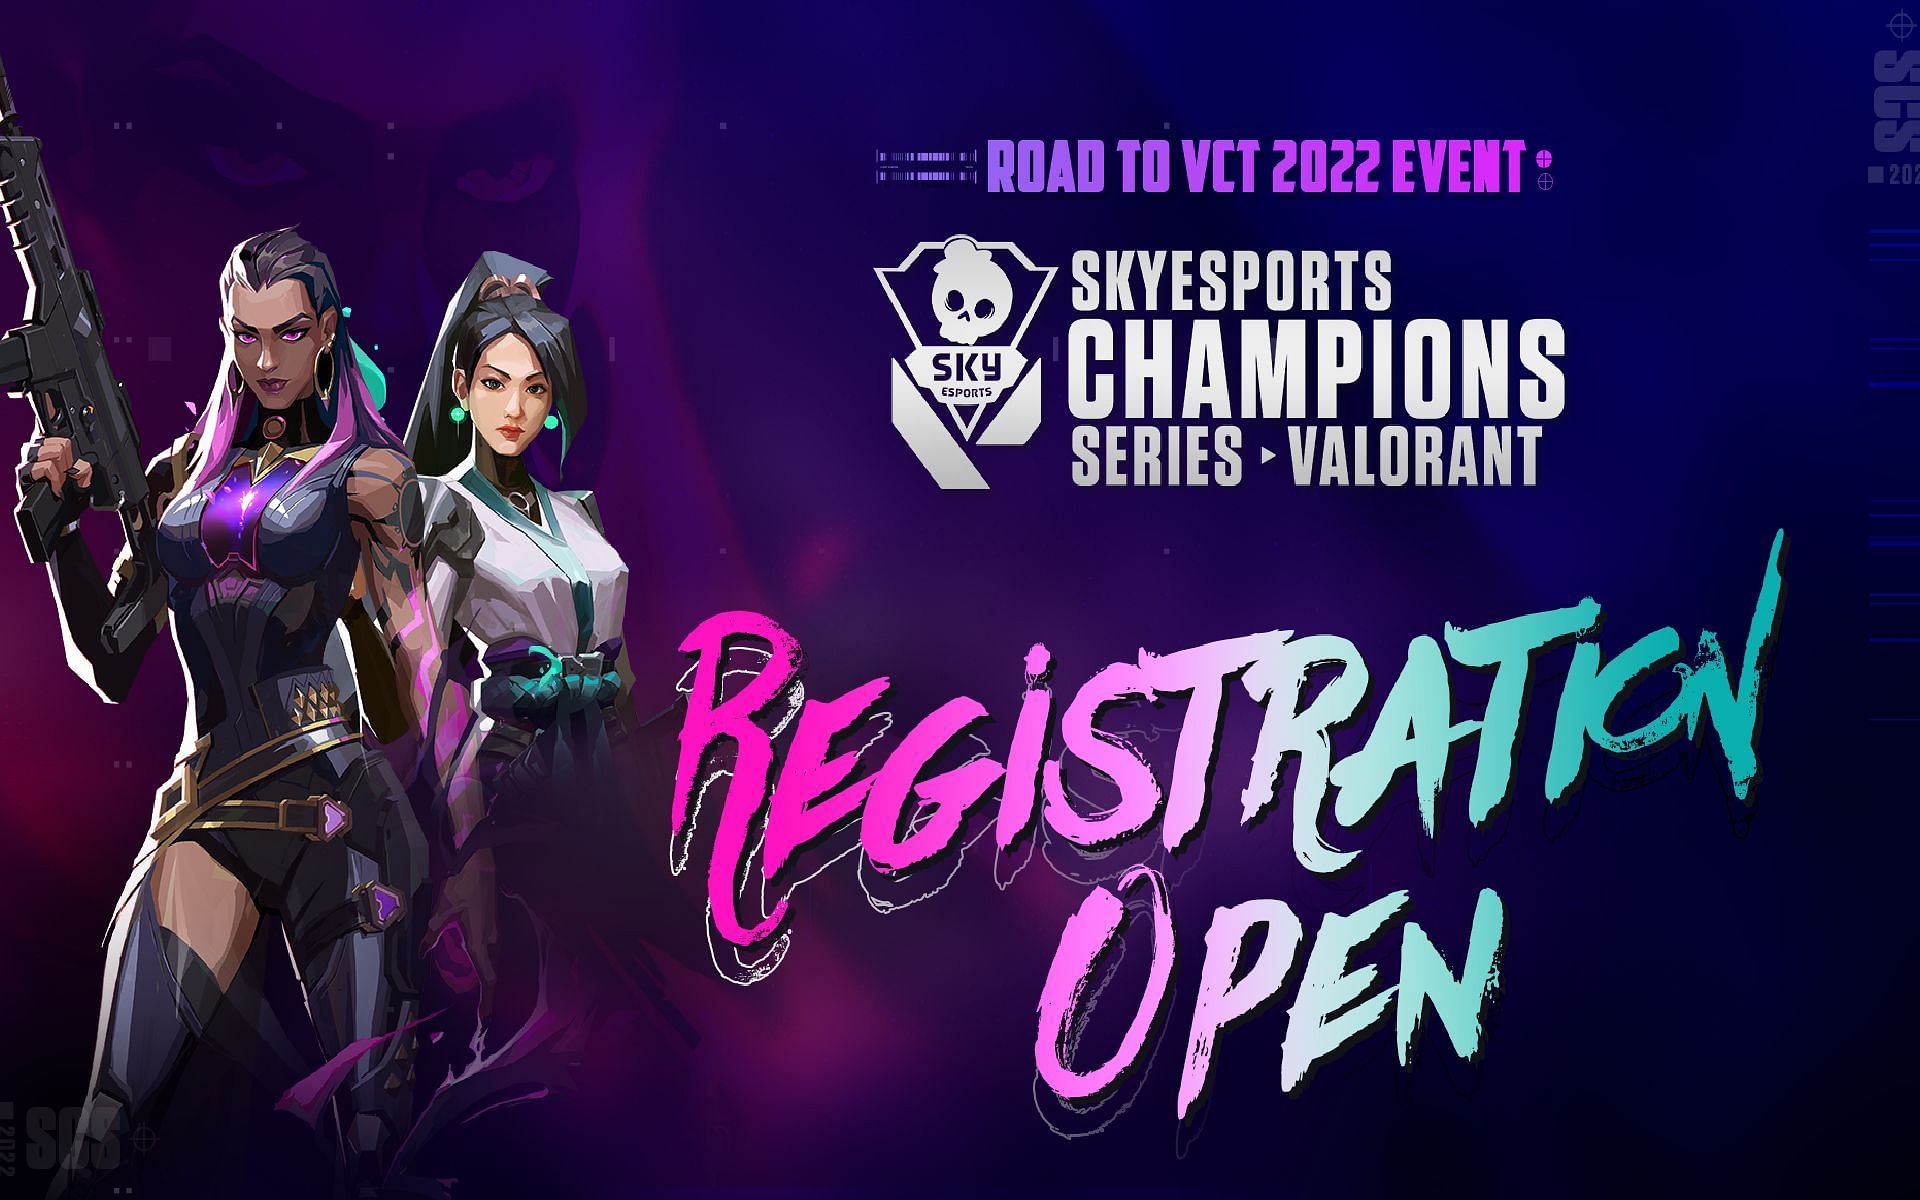 How to register for Valorant Skyesports Champions Series 2022? (Image via Skyesports)